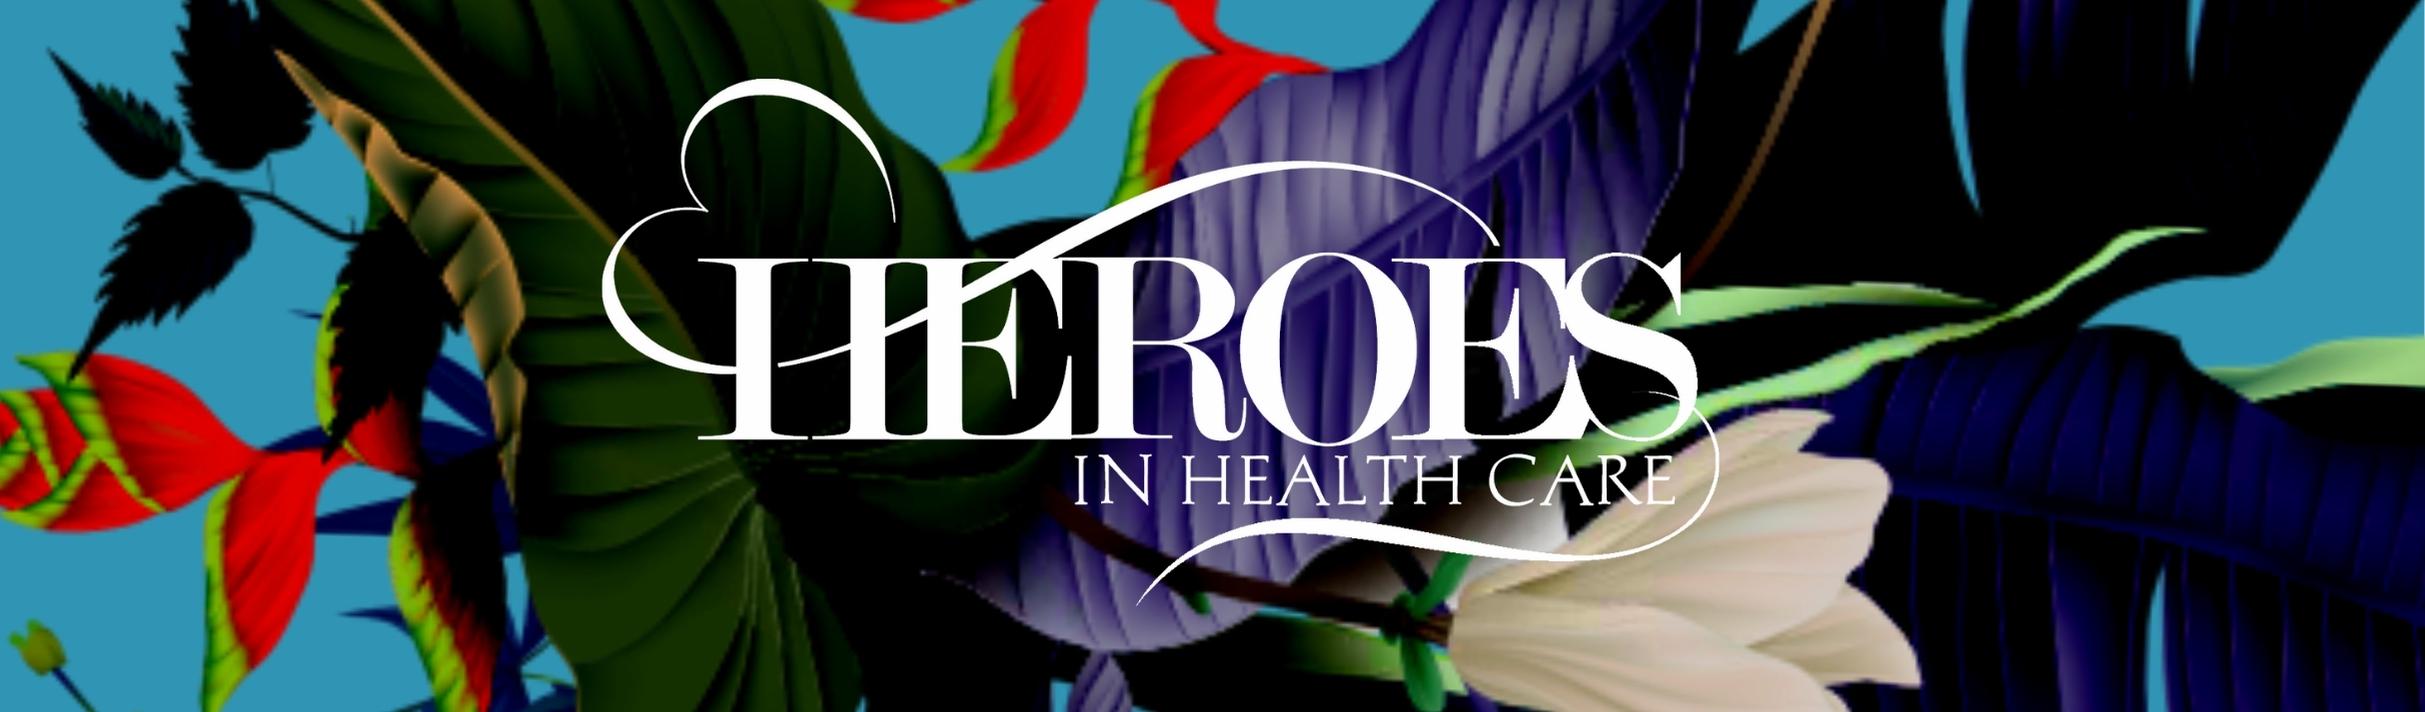 Heroes in Health Care Logo